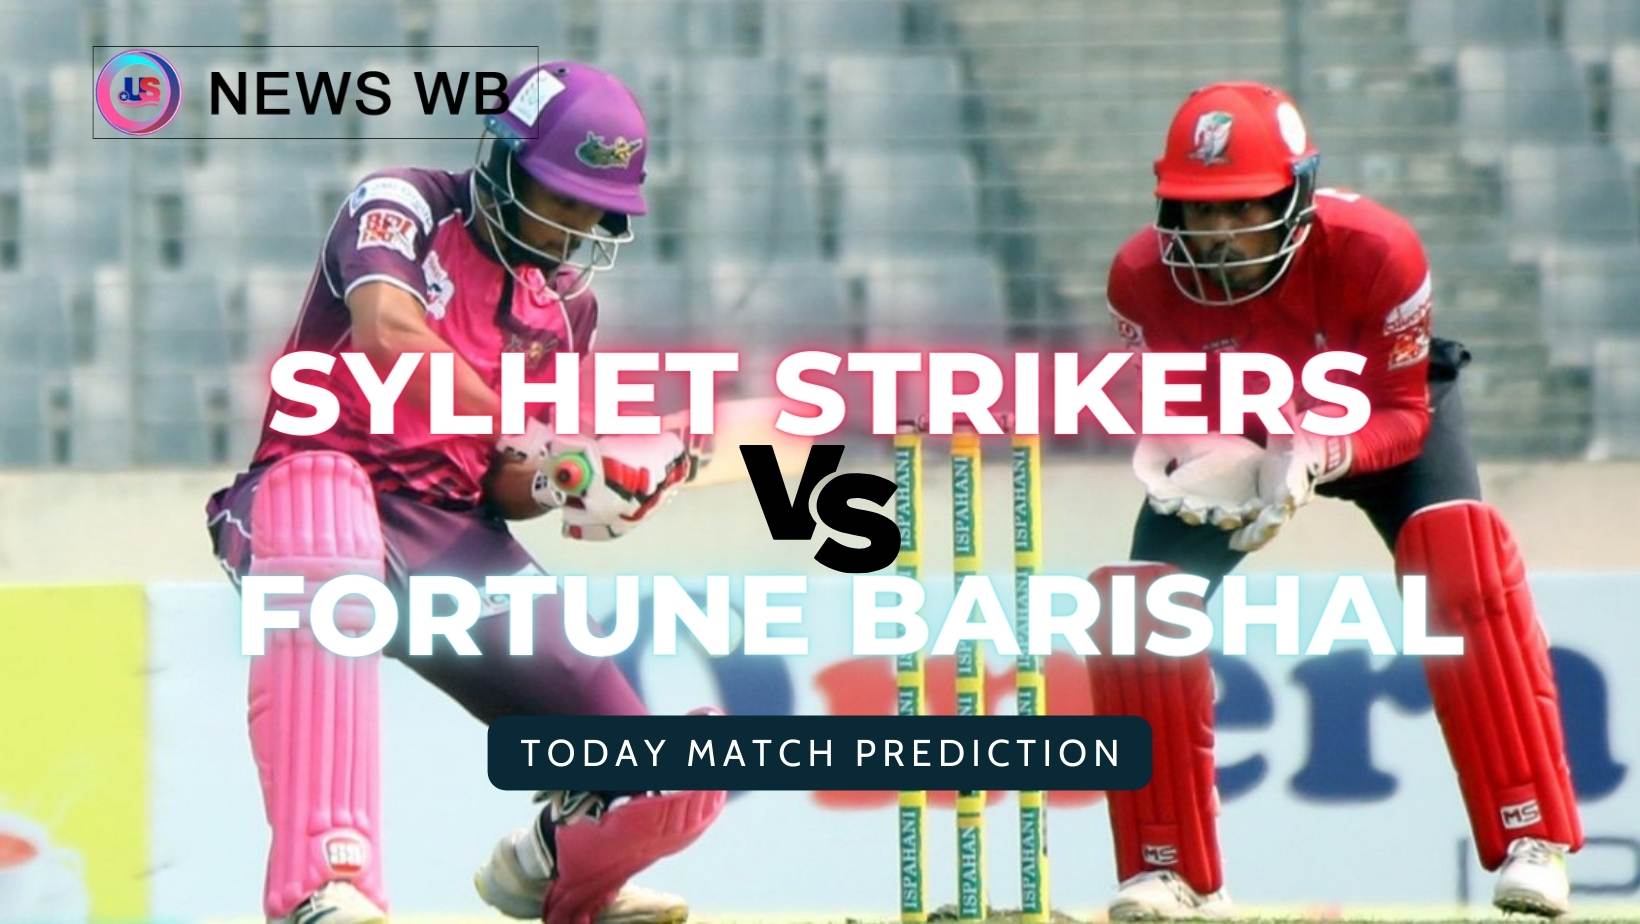 Today Match Prediction: SYS vs FB Dream11 Team, Sylhet Strikers vs Fortune Barishal 16th Match, Who Will Win?